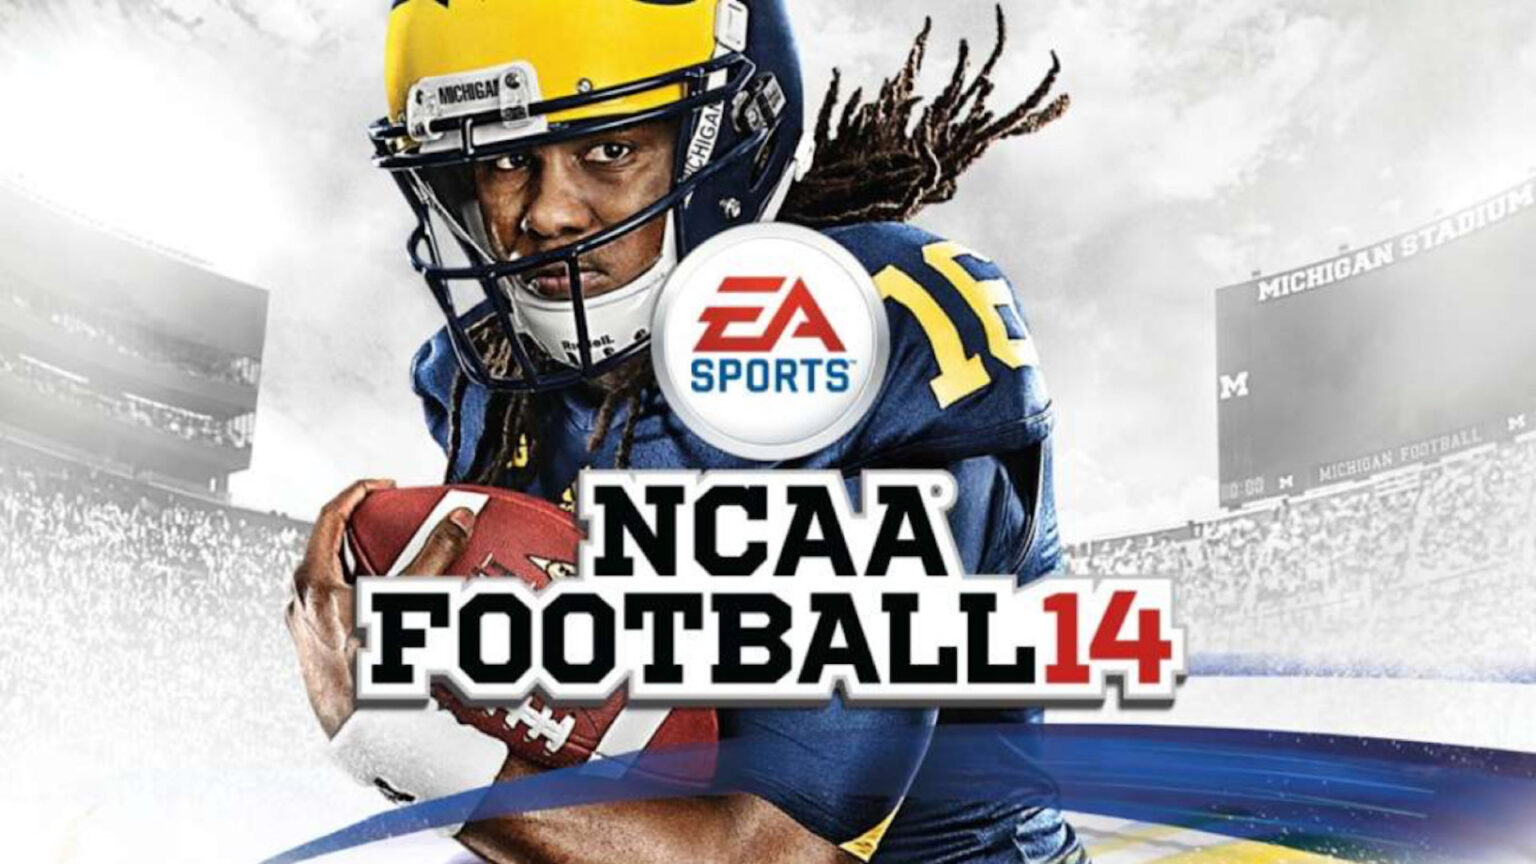 It's been a long time coming, but EA finally announced a reboot of 'NCAA Football' games. Its timing could never be better. Read about why the game matters.